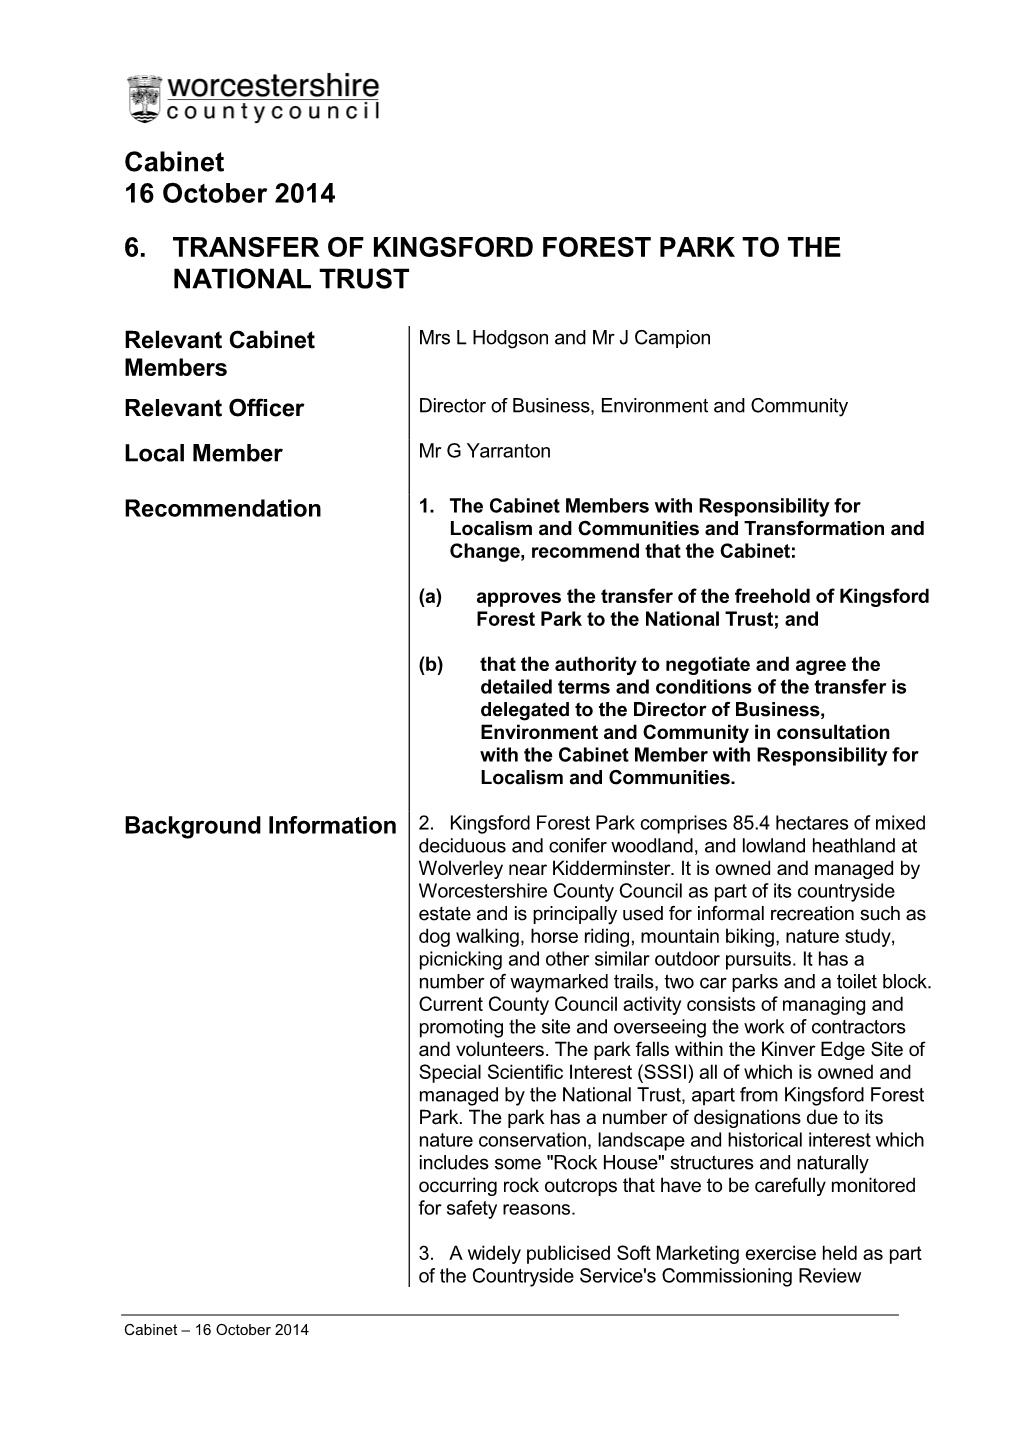 Transfer of Kingsford Forest Park to the National Trust